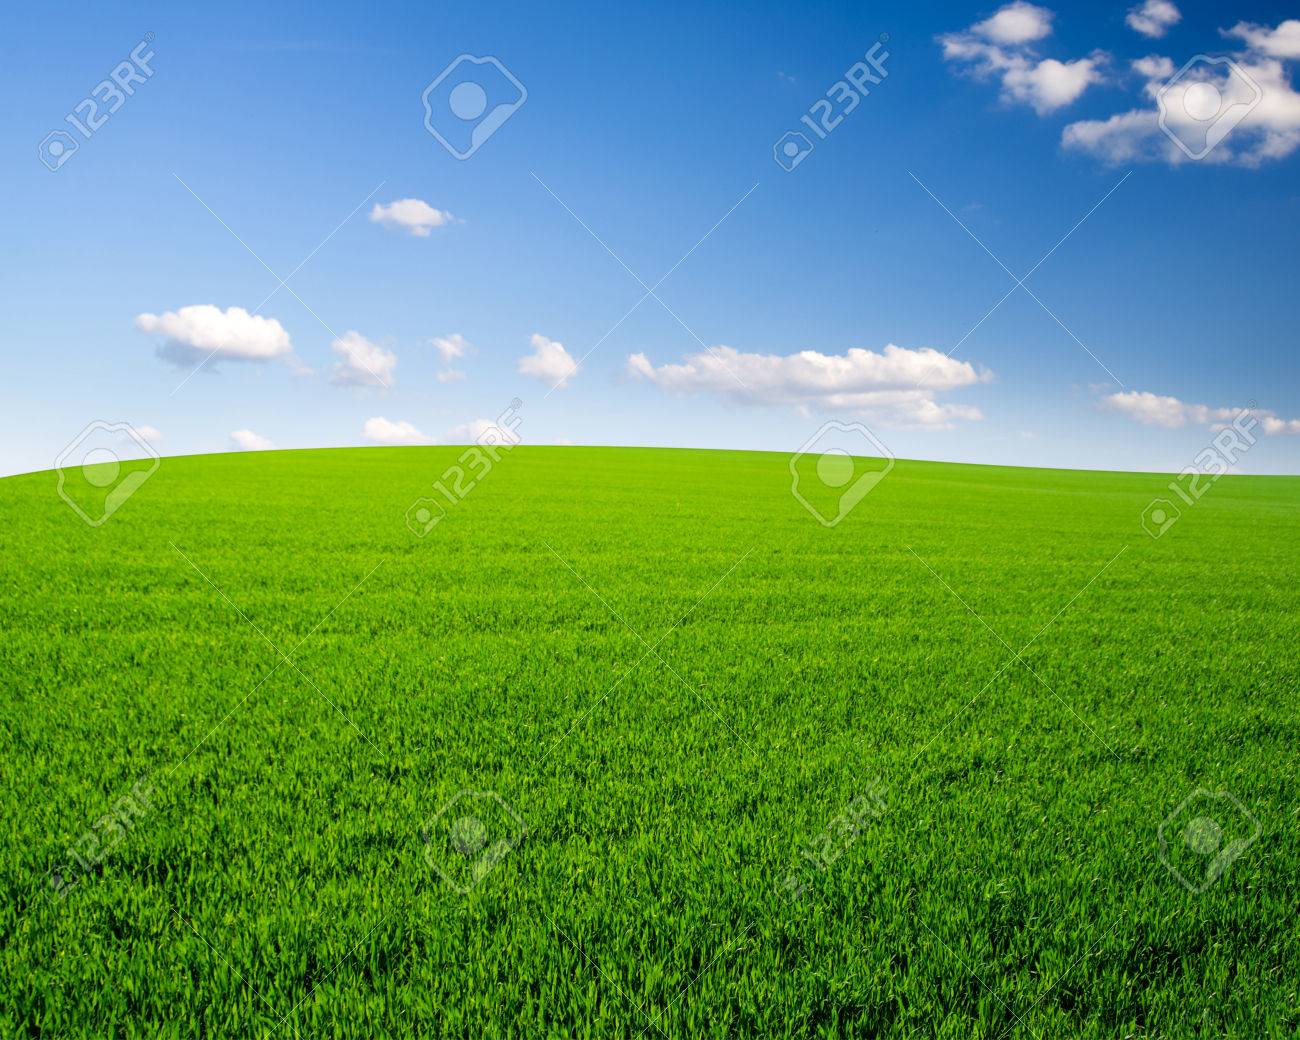 Sky And Grass Field Background Stock Photo Picture Royalty